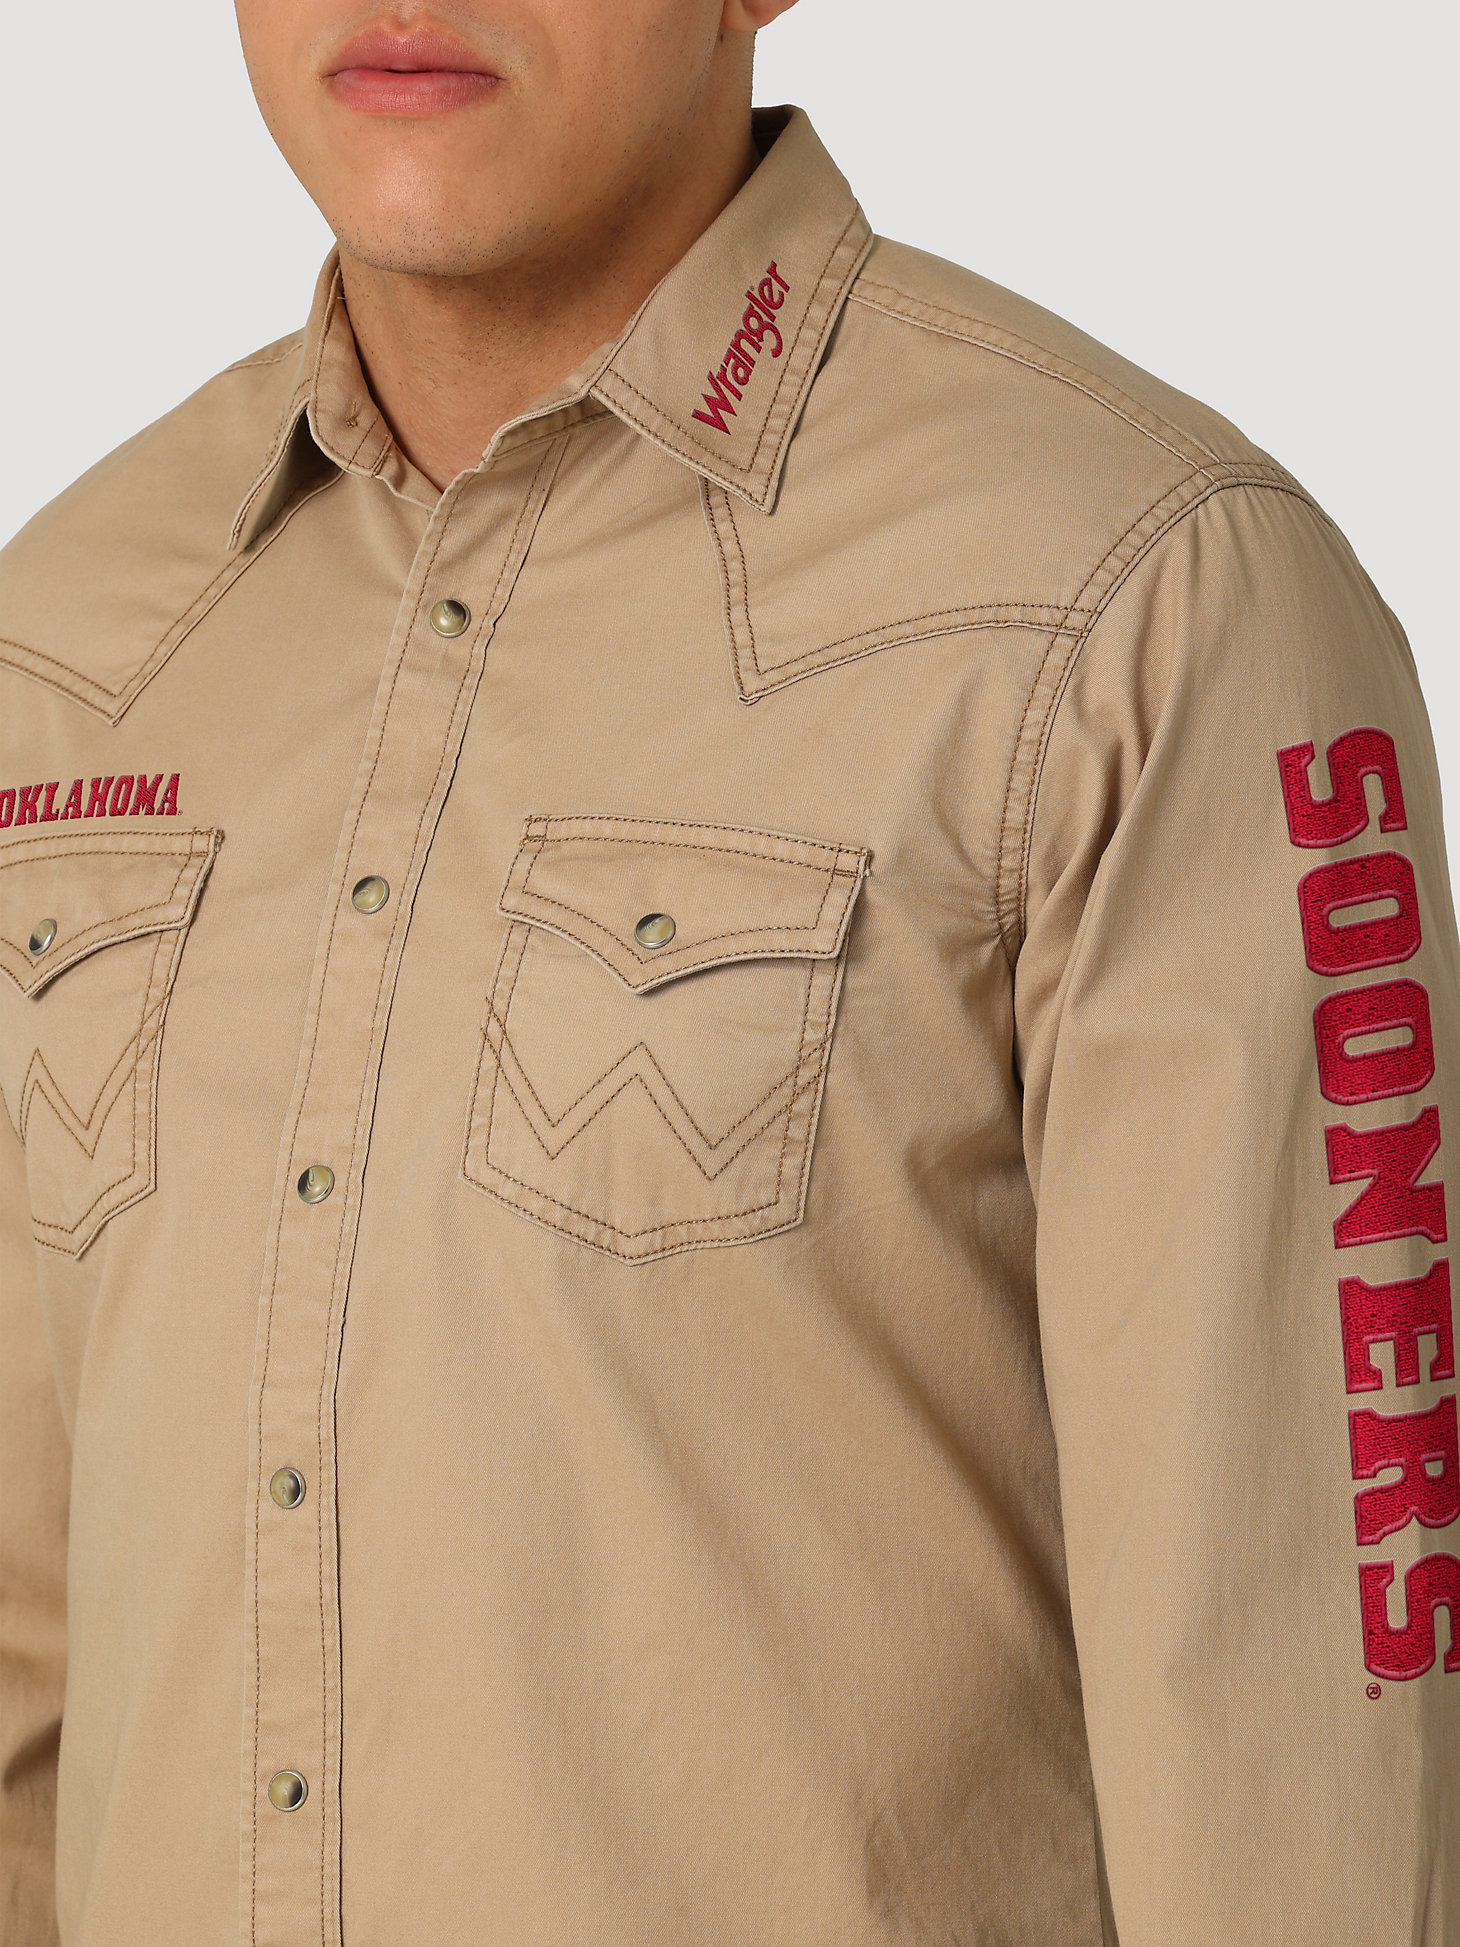 Wrangler Collegiate Embroidered Twill Western Snap Shirt in University of Oklahoma alternative view 3